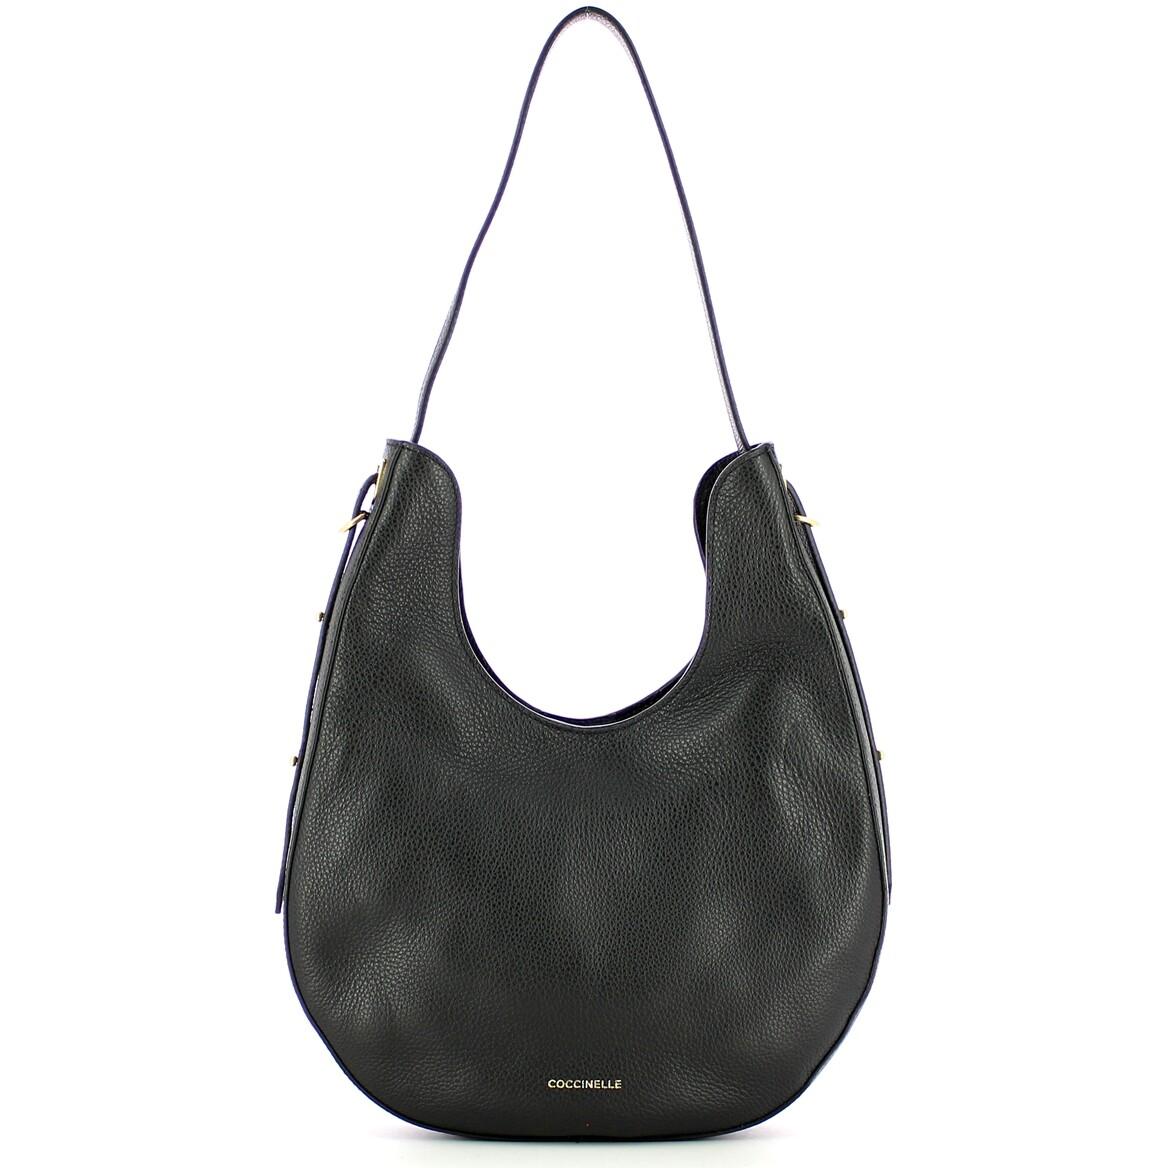 Coccinelle Pink Leather Bagatelle Hobo Bag at FORZIERI